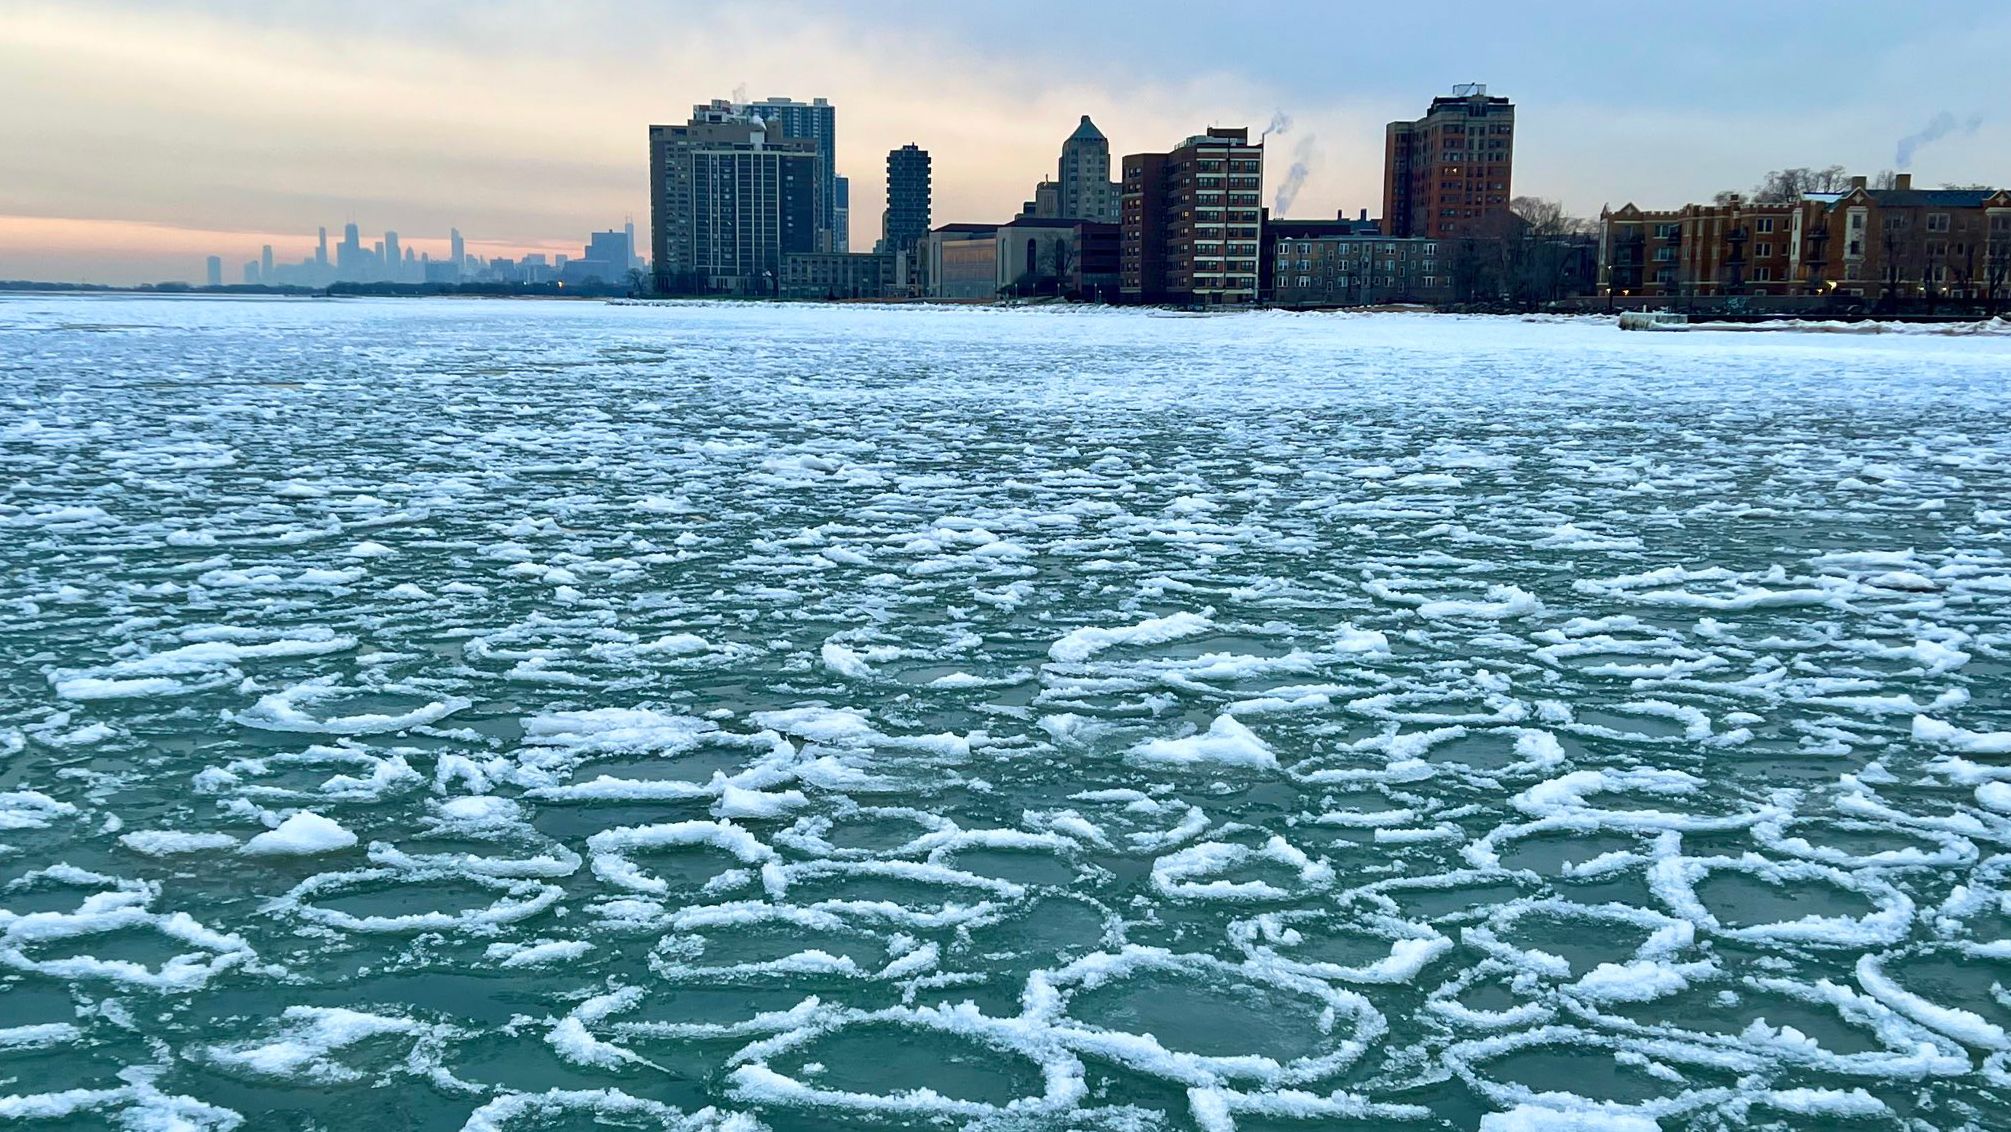 Ice formations in Lake Michigan in Chicago taken by Sharan Banagiri. He told CNN these photo were taken at Loyola Beach at Rogers Park, which is about 10 miles north of downtown Chicago.